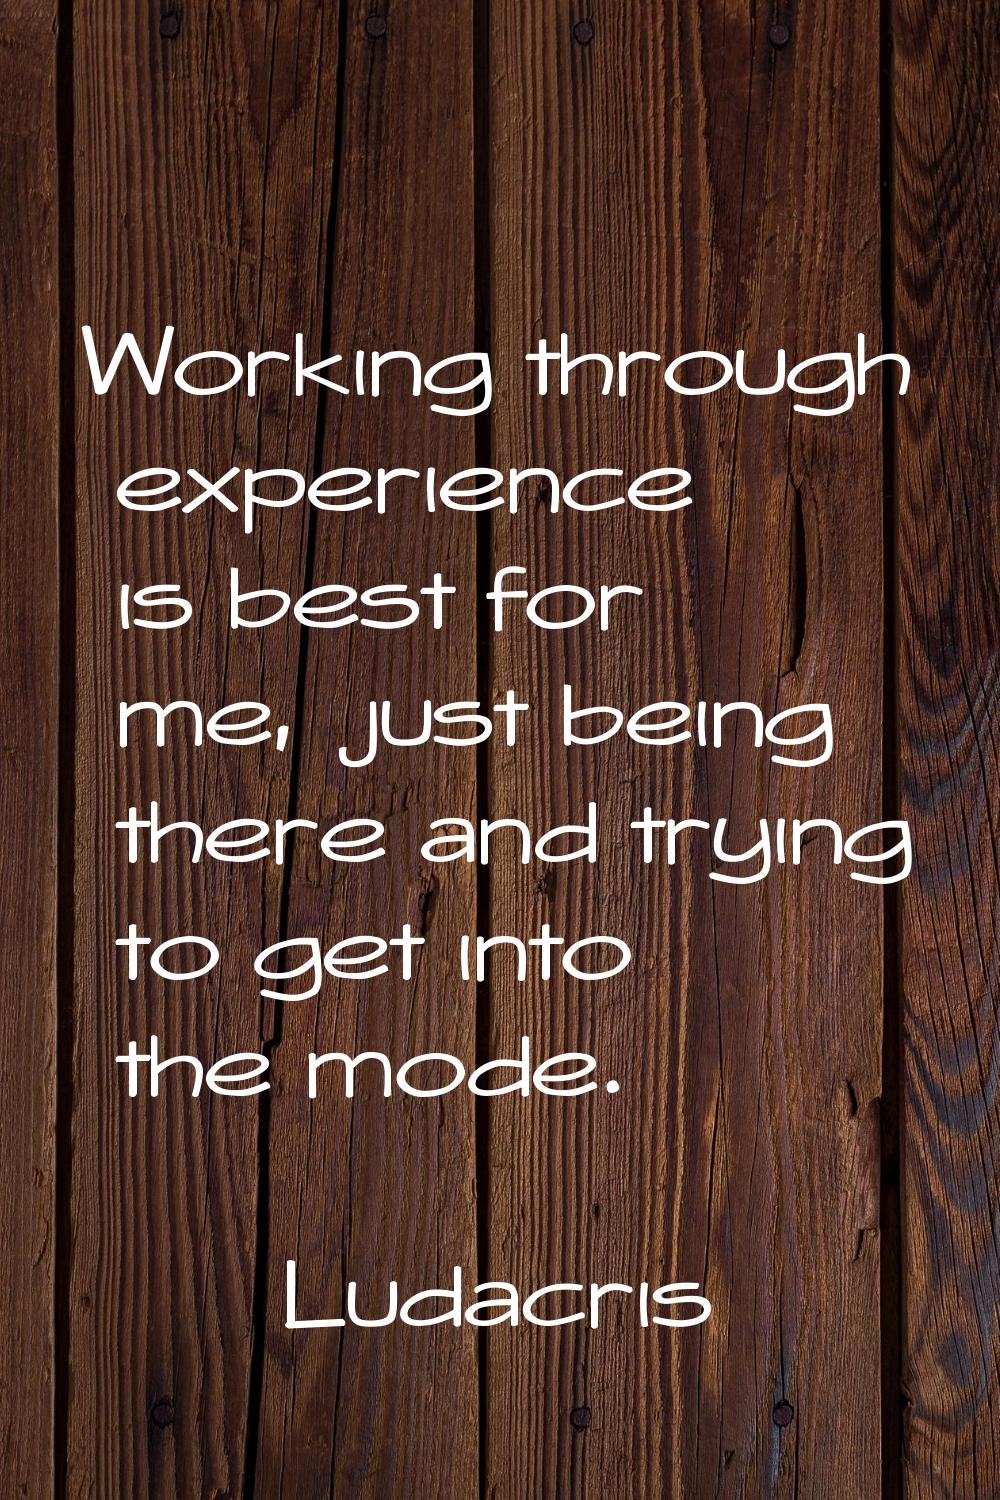 Working through experience is best for me, just being there and trying to get into the mode.